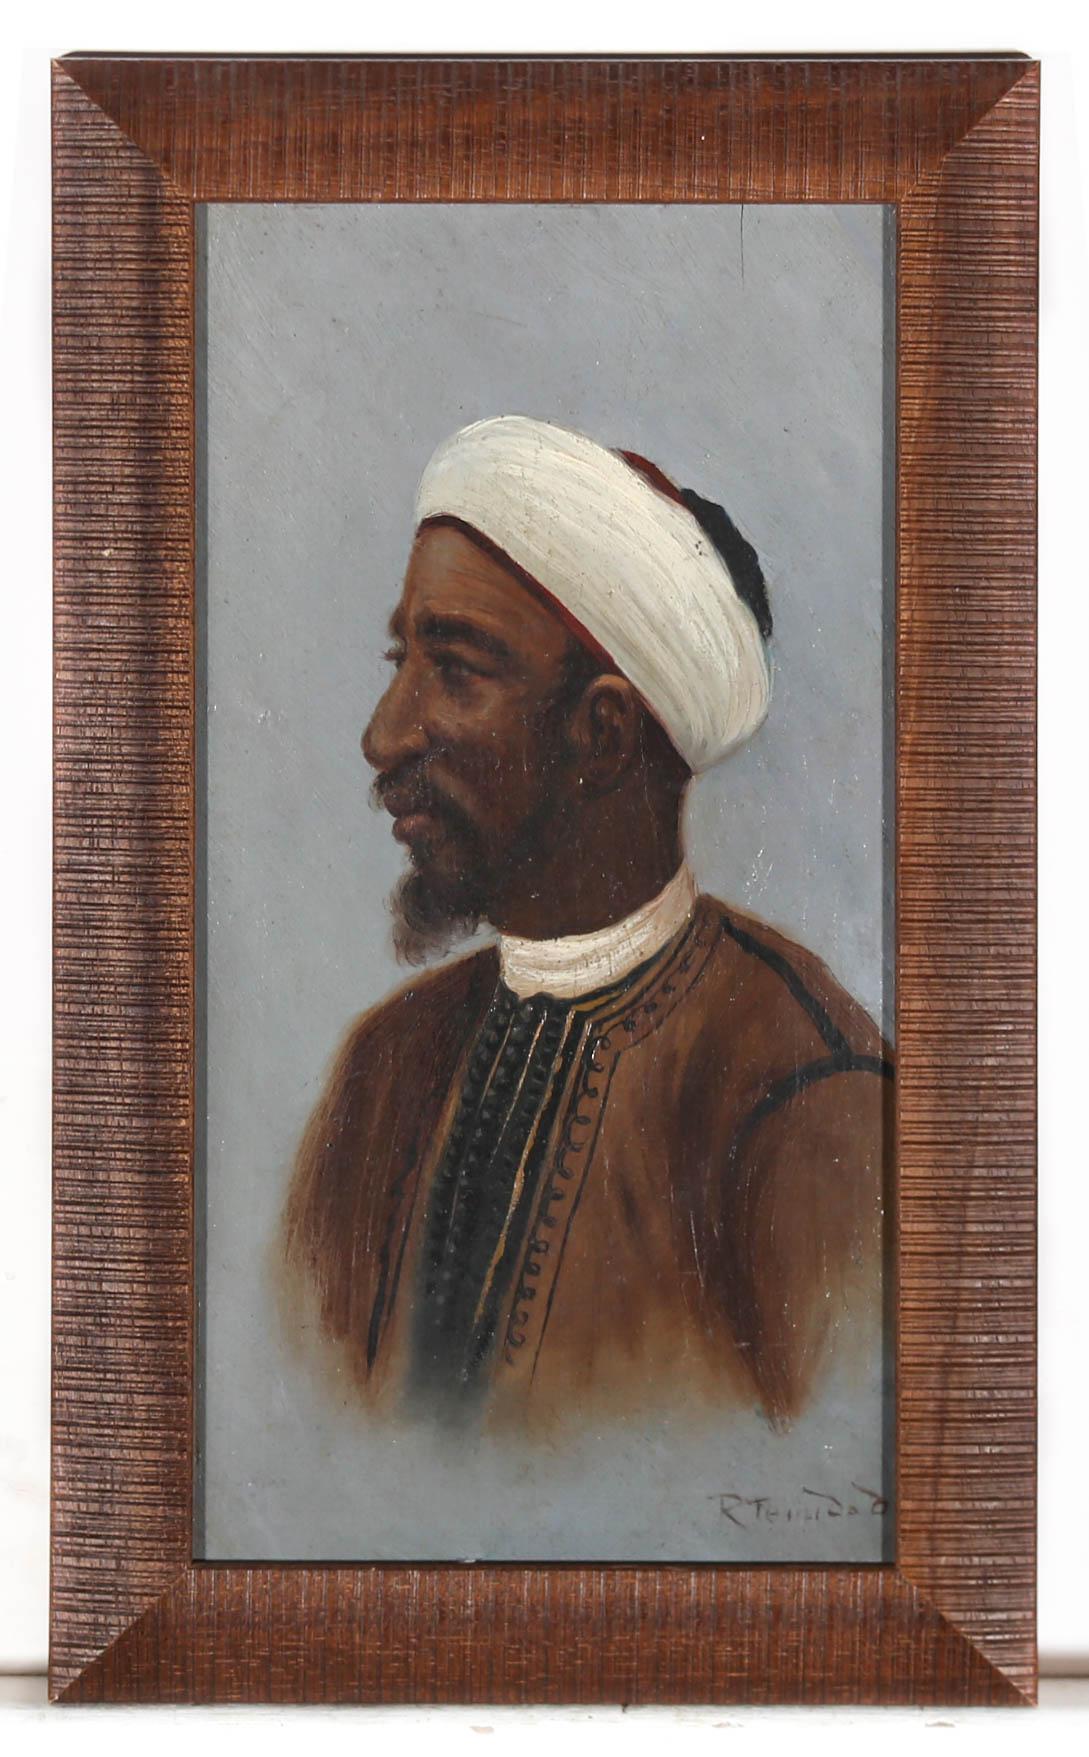 A charming portrait of a North African man in traditional dress. The artist captures him against a blue background which accentuates the man's fine features and intricate clothing. Signed to the lower right. Presented in a wooden frame. On board.
